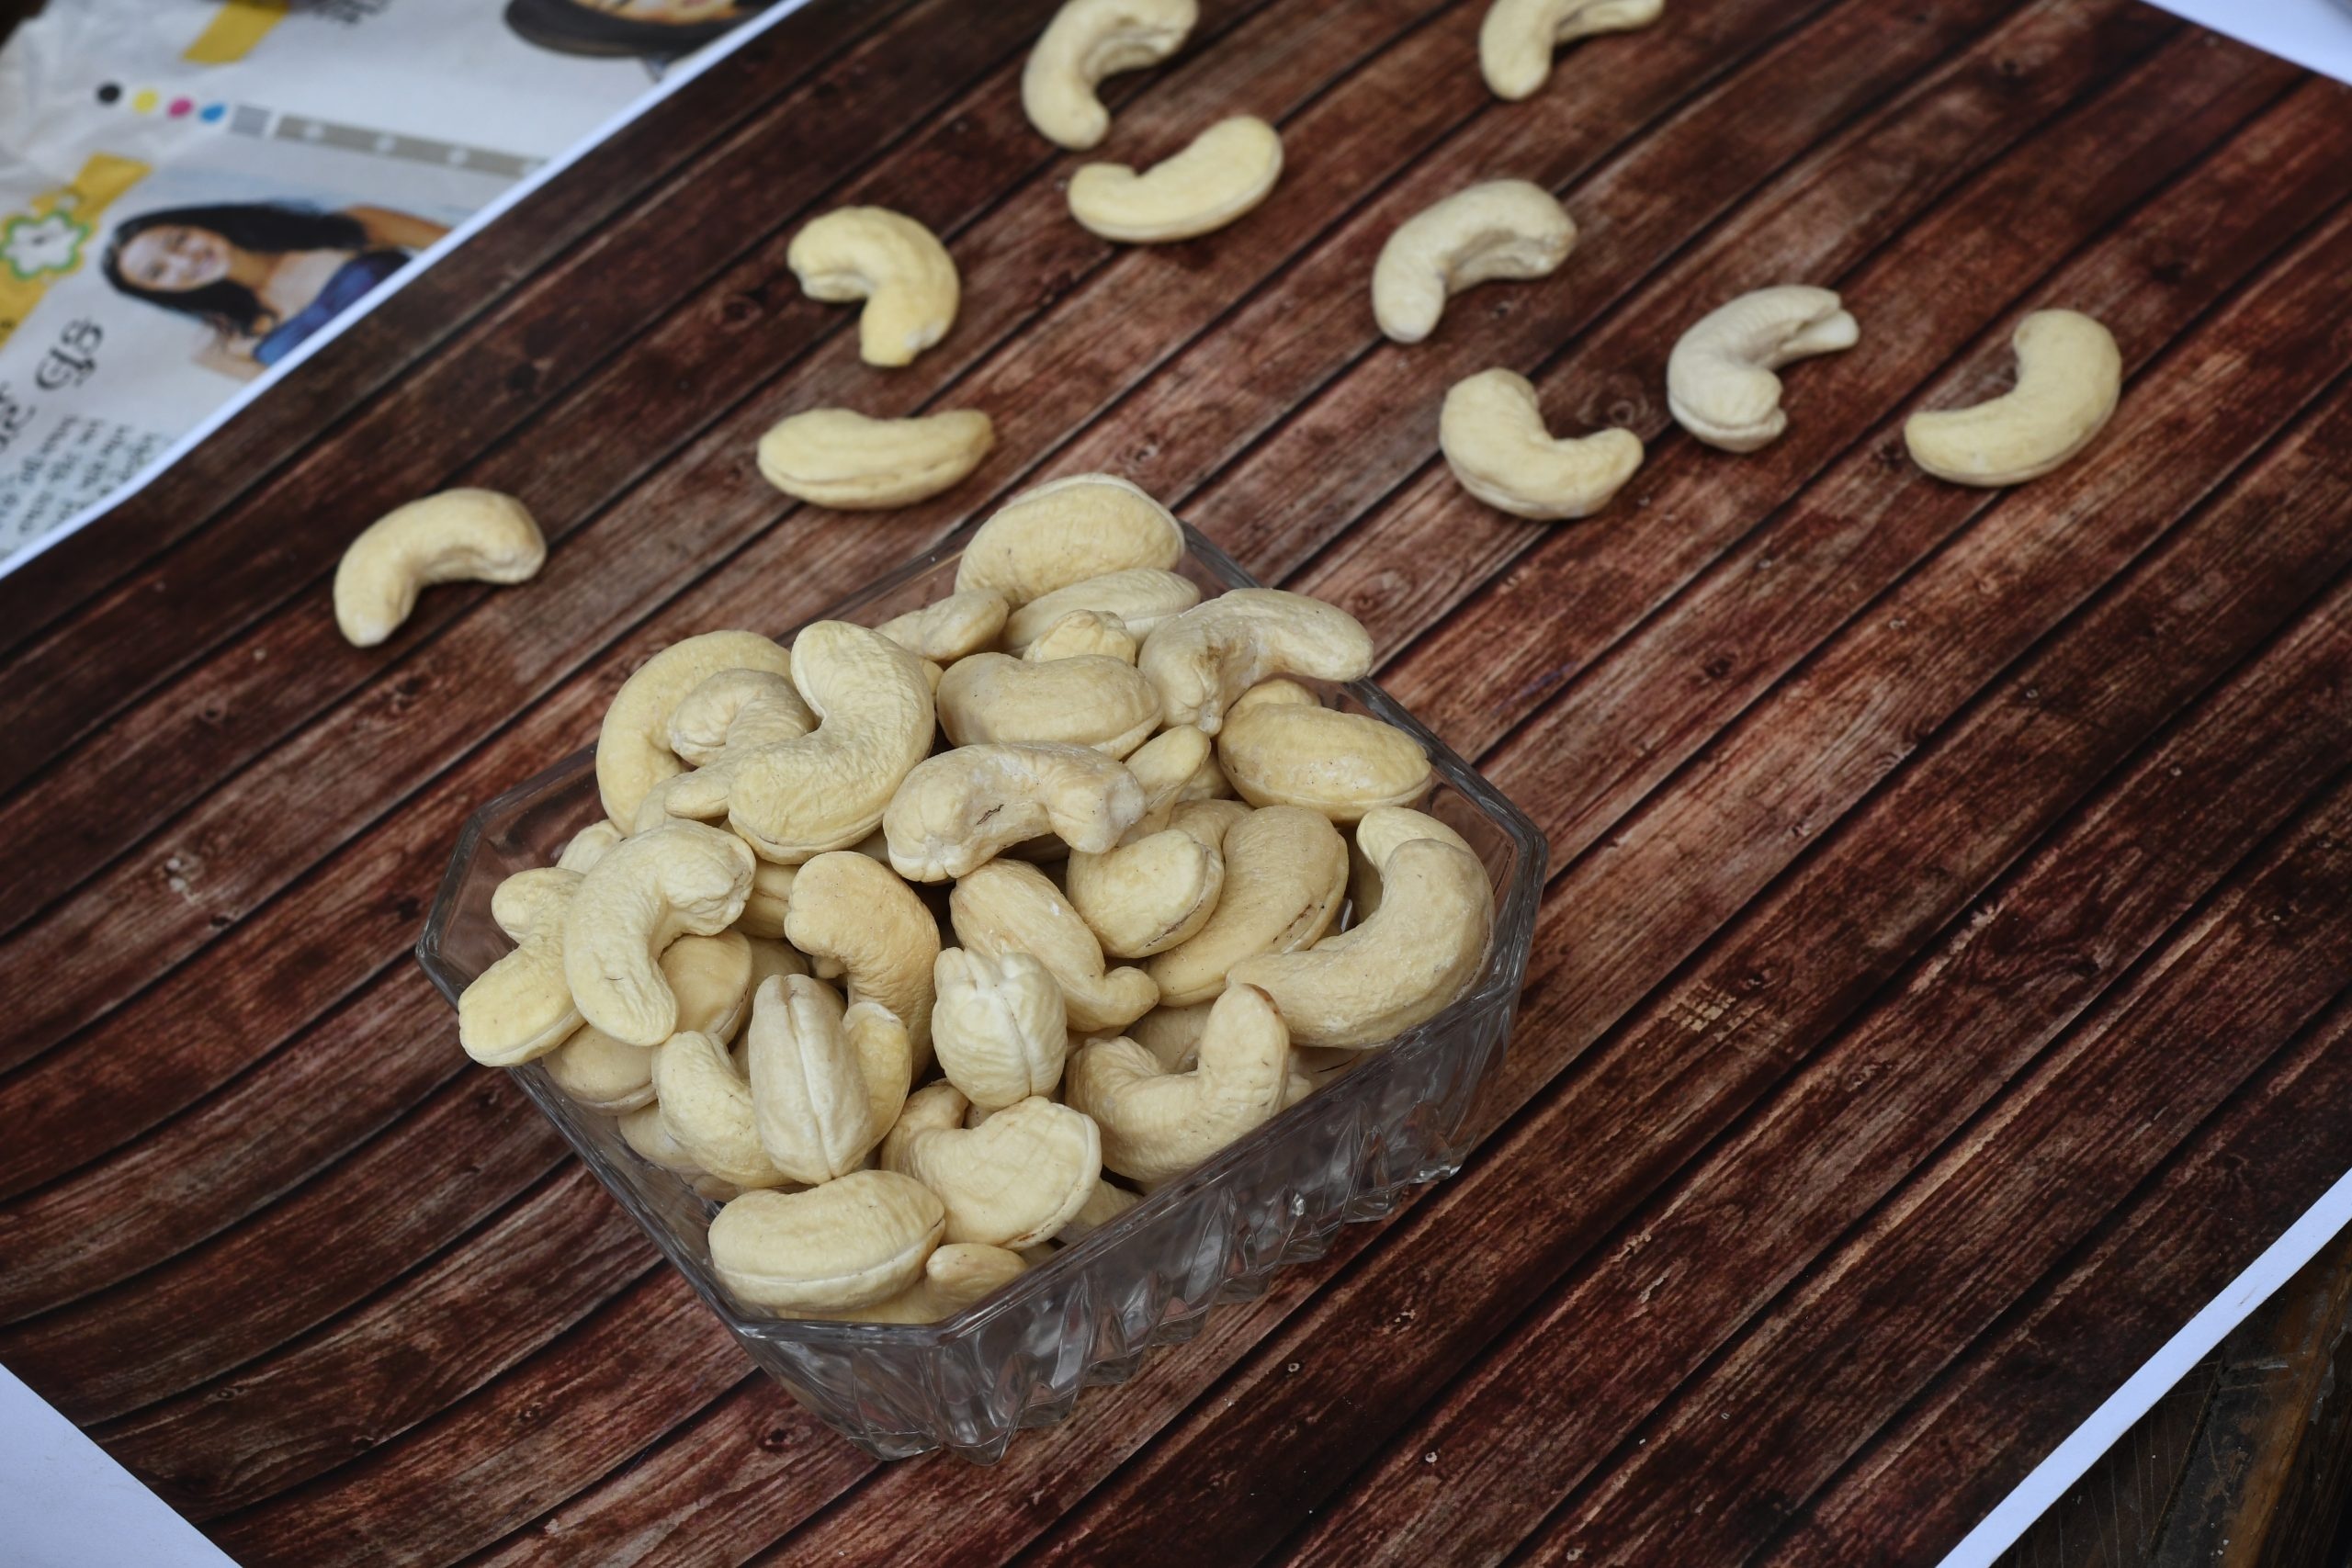 Cashew Nuts: The seeds commonly used in South and Southeast Asian cuisine. 2560x1710 HD Wallpaper.